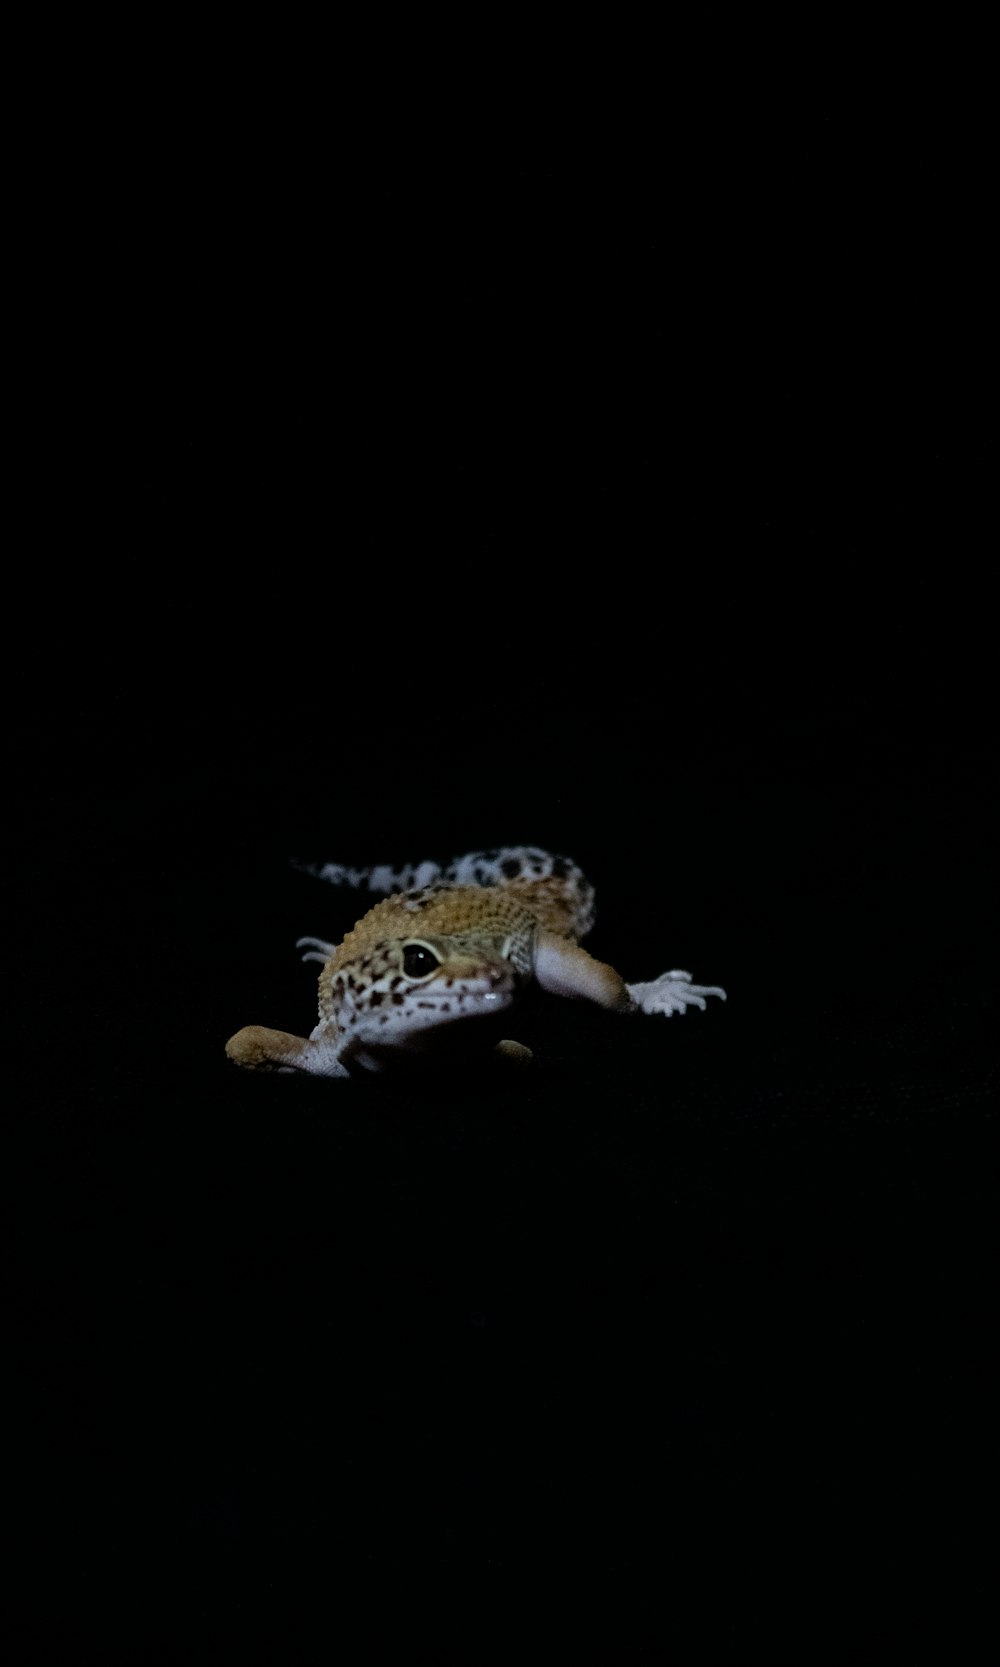 a small lizard in the dark with its mouth open